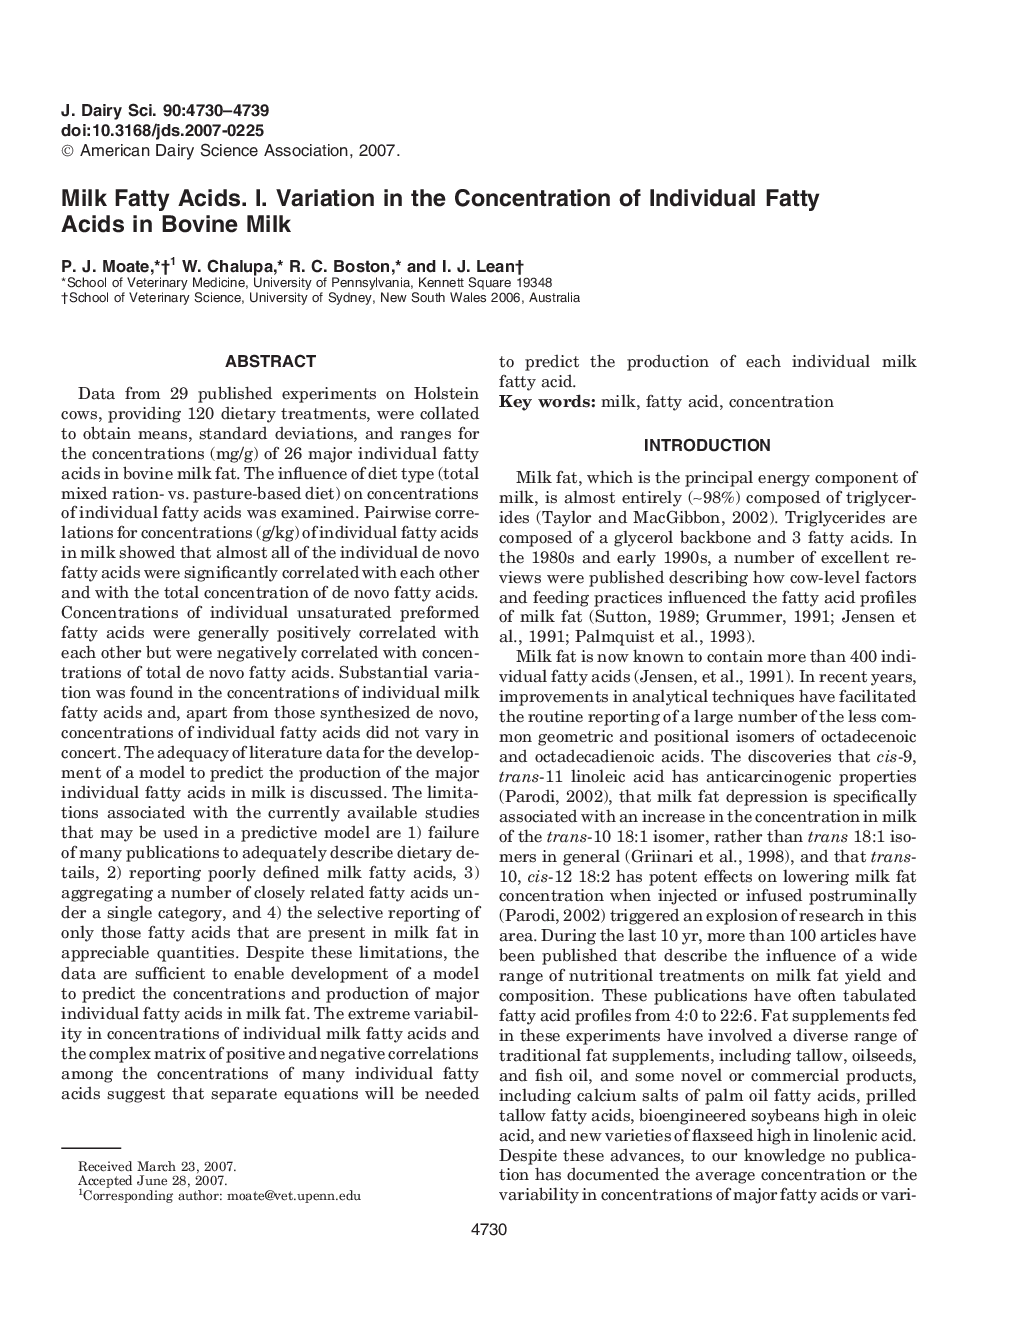 Milk Fatty Acids. I. Variation in the Concentration of Individual Fatty Acids in Bovine Milk